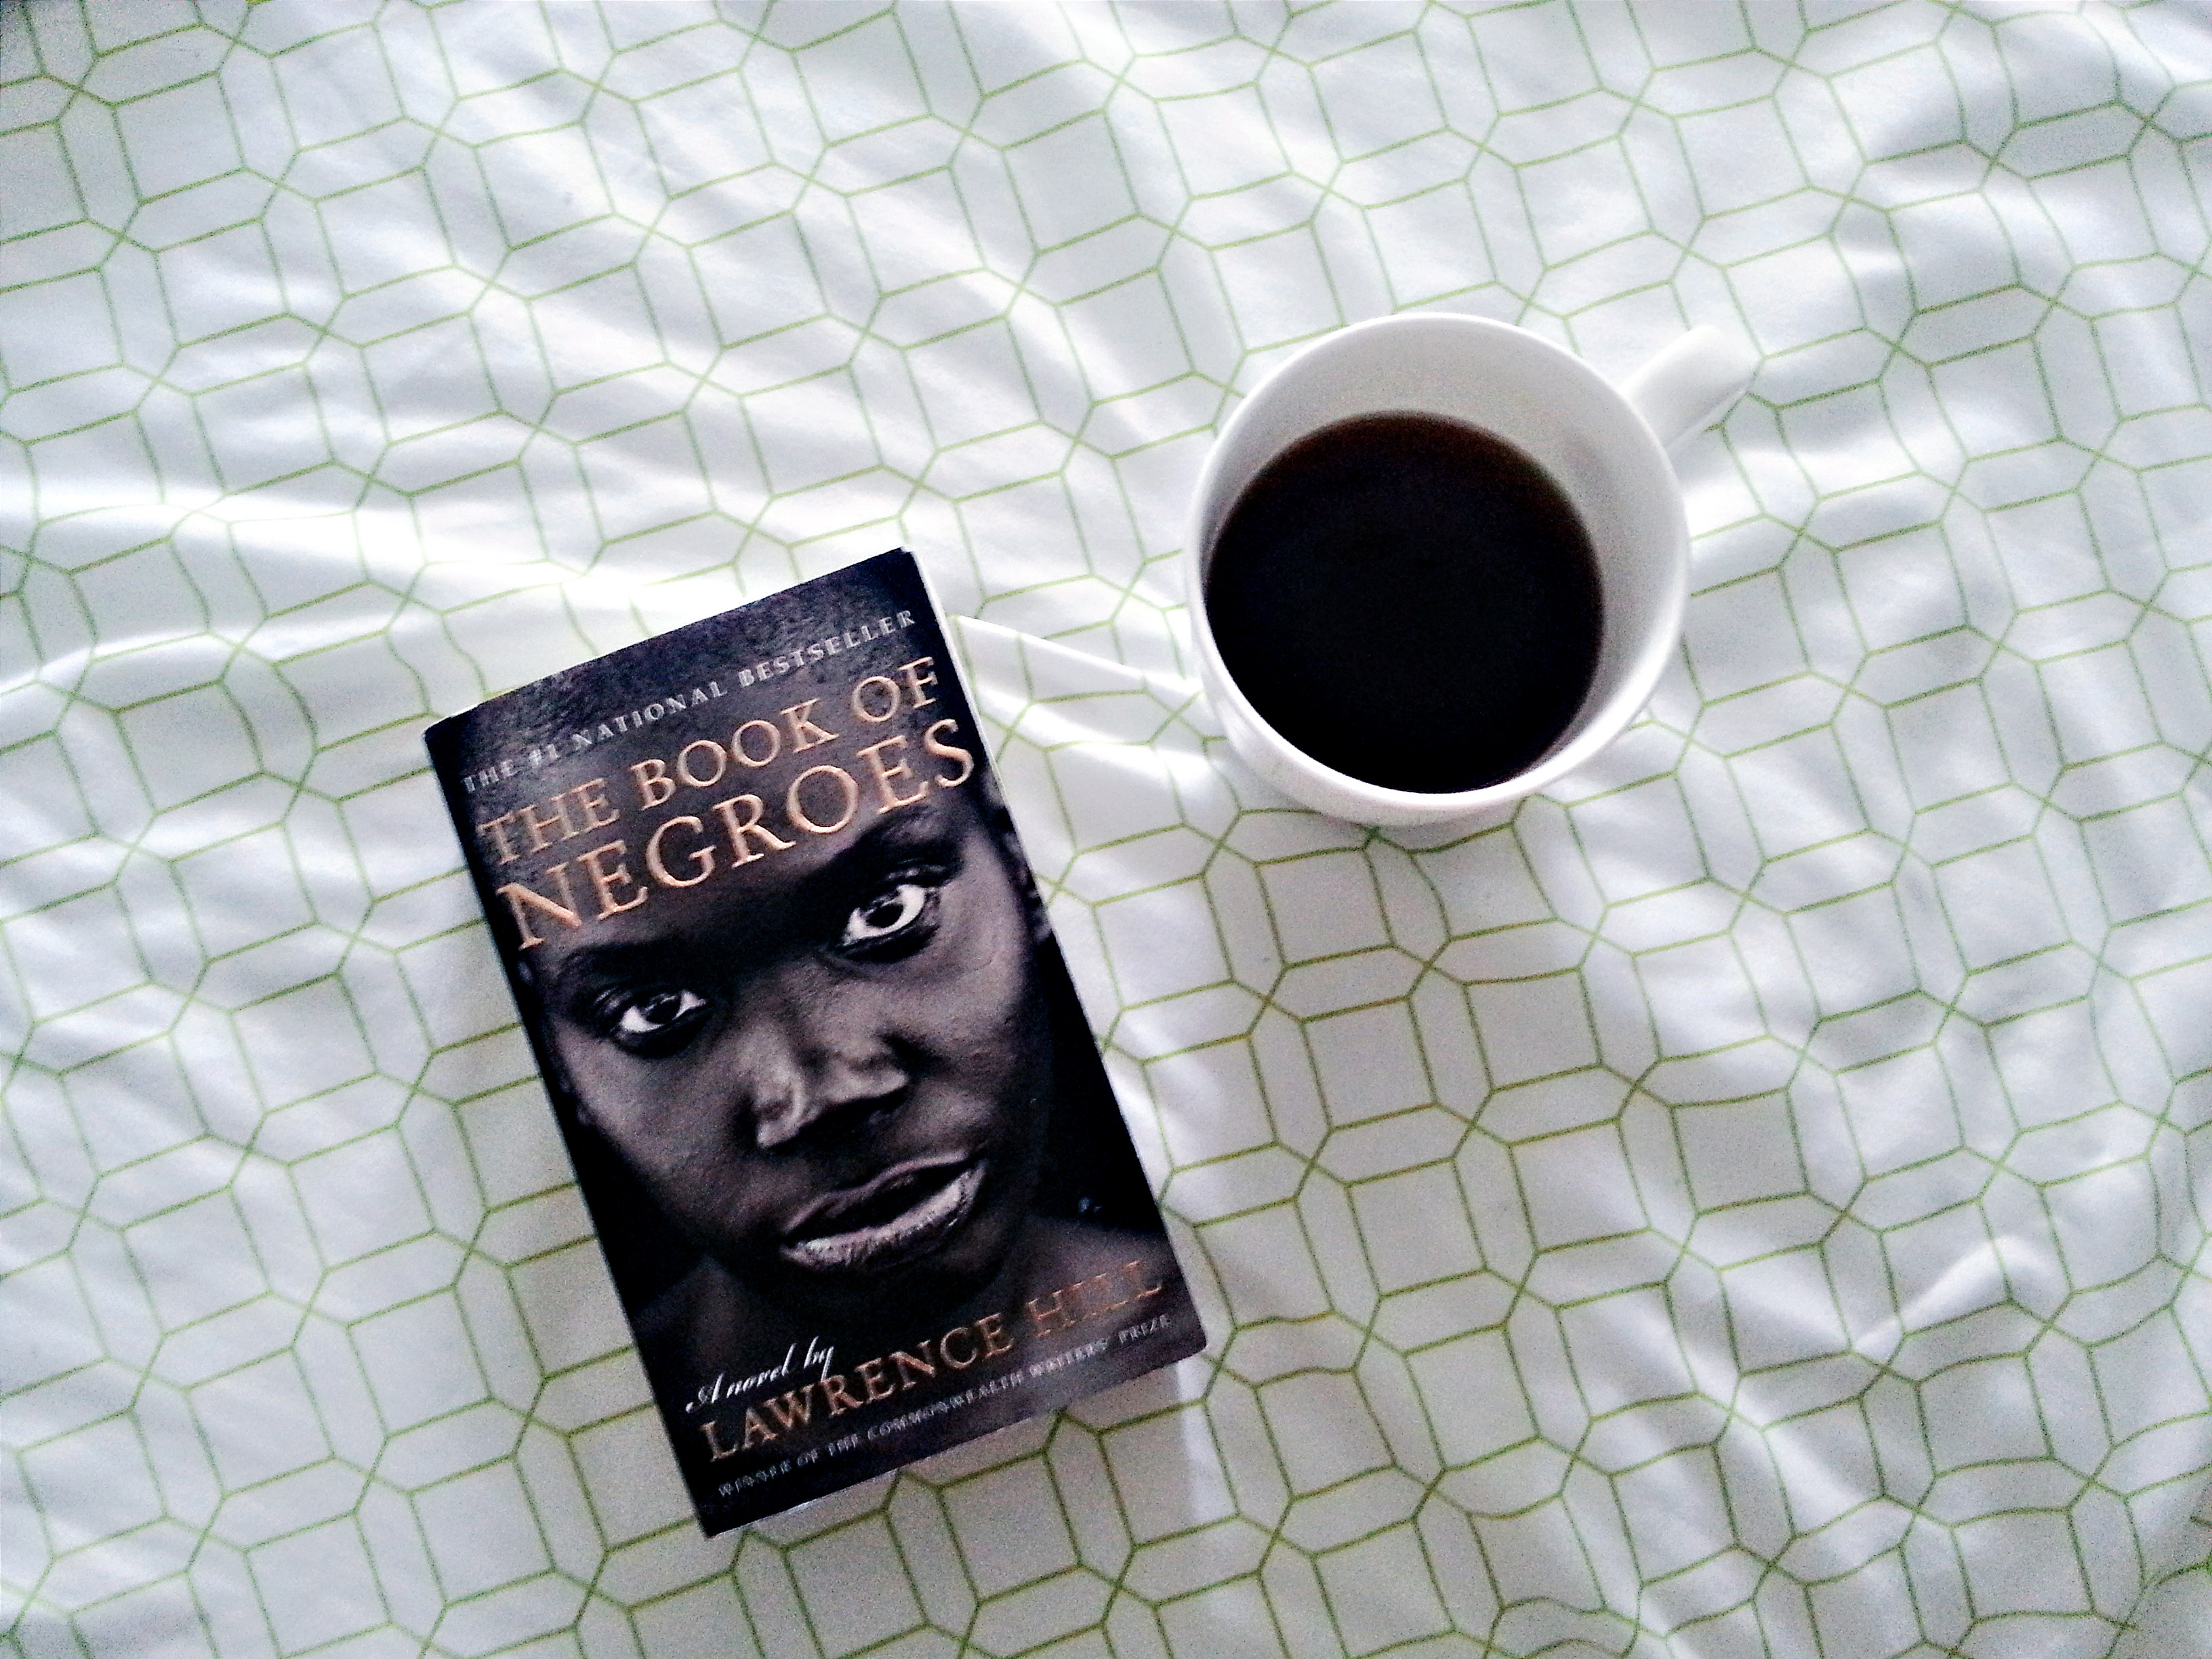 The Book of Negroes